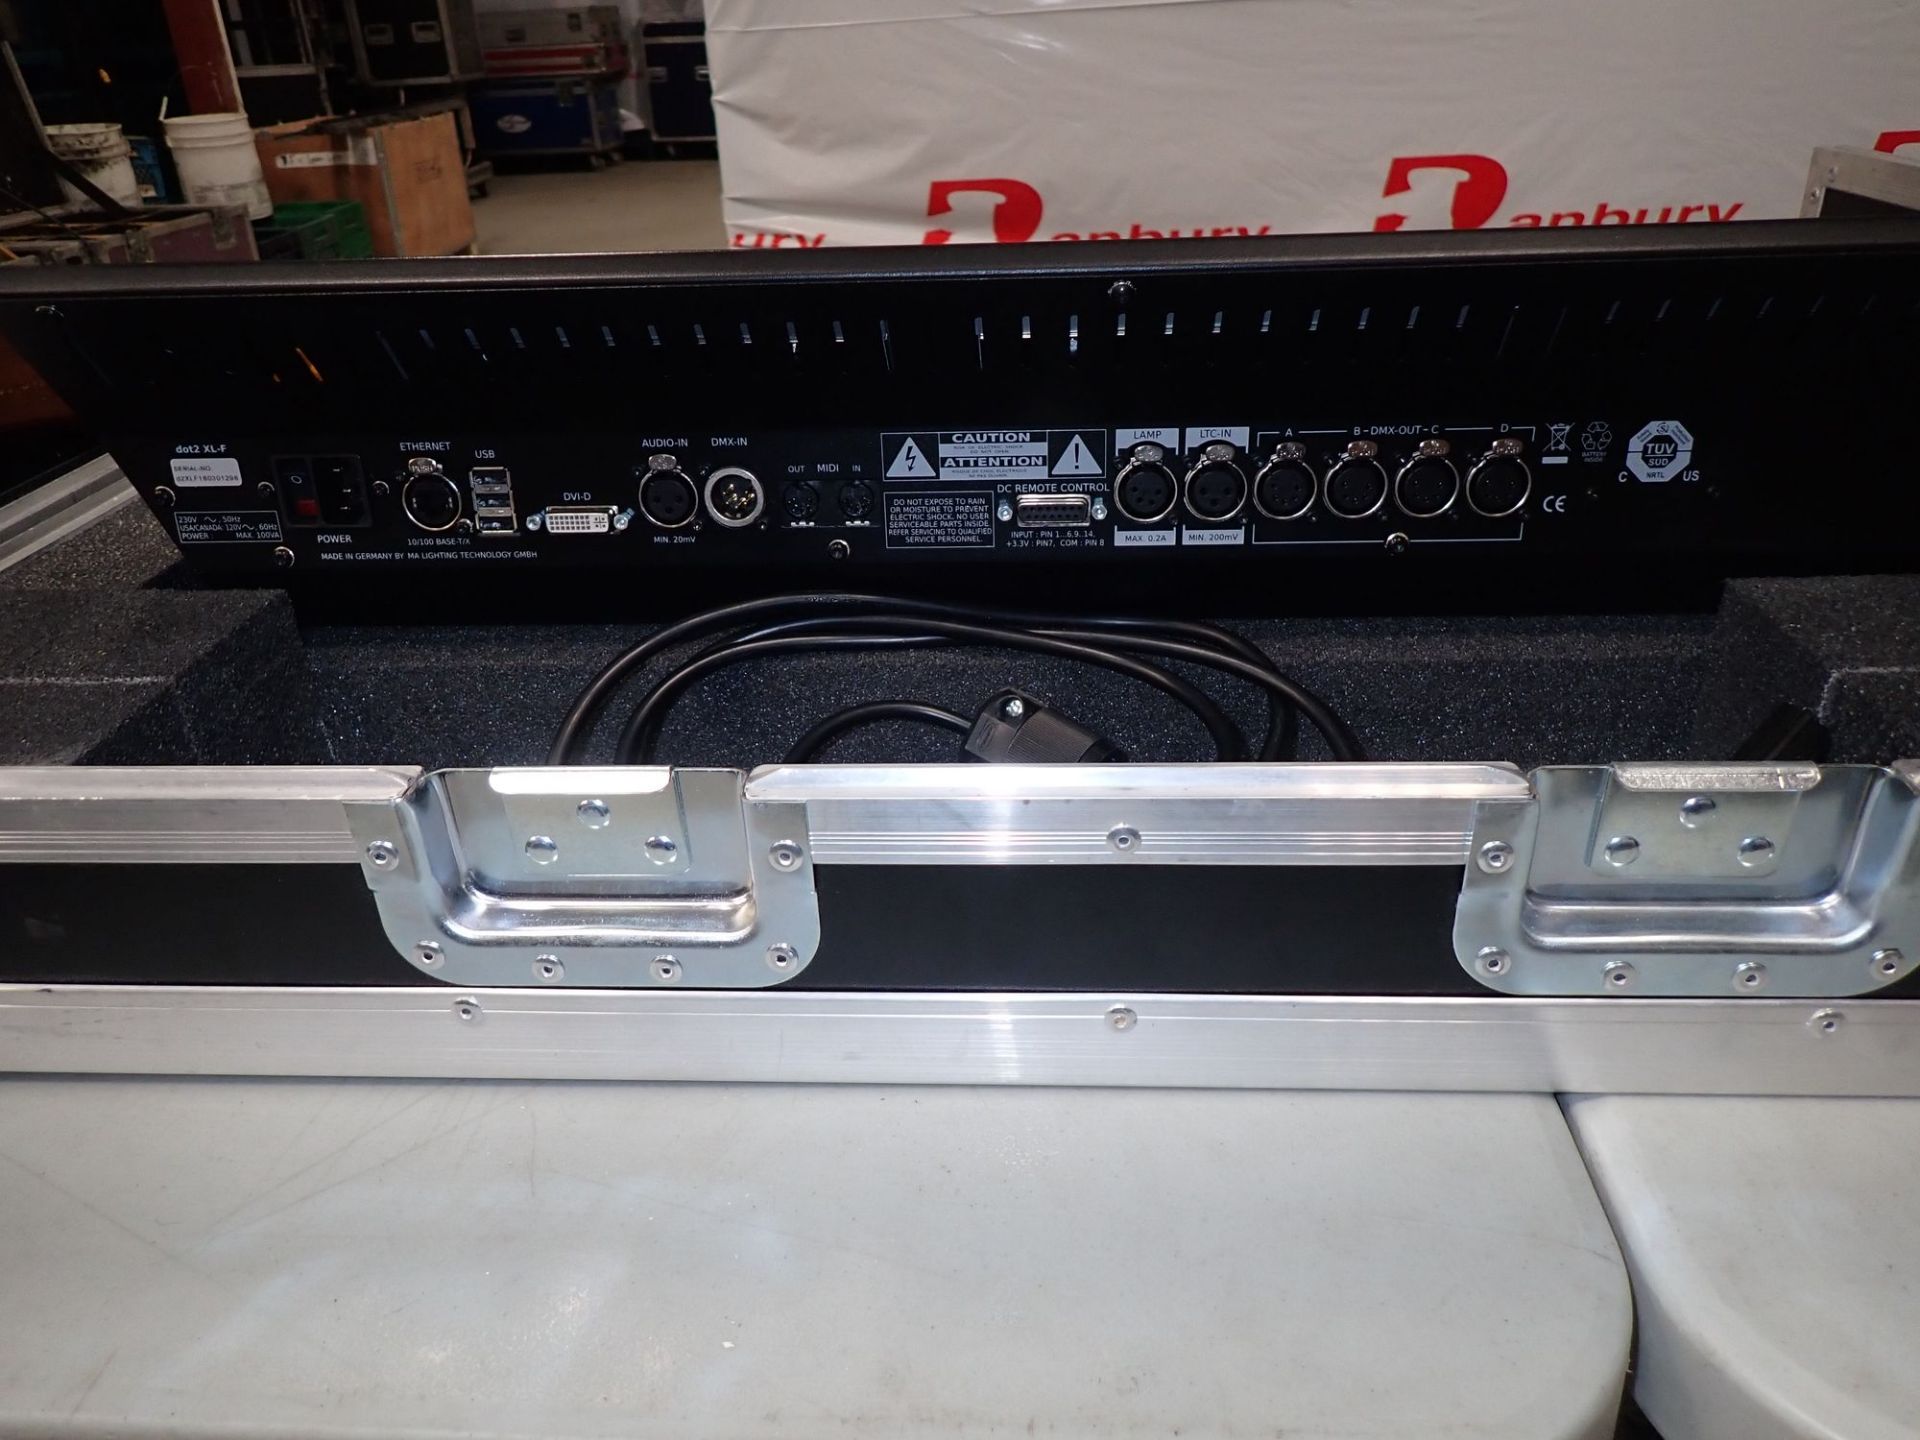 2019 MA LIGHTING GRAND MA DOT 2 XLF LIGHITNG CONTROL CONSOLE /W COVER & ROAD CASE - Image 2 of 2